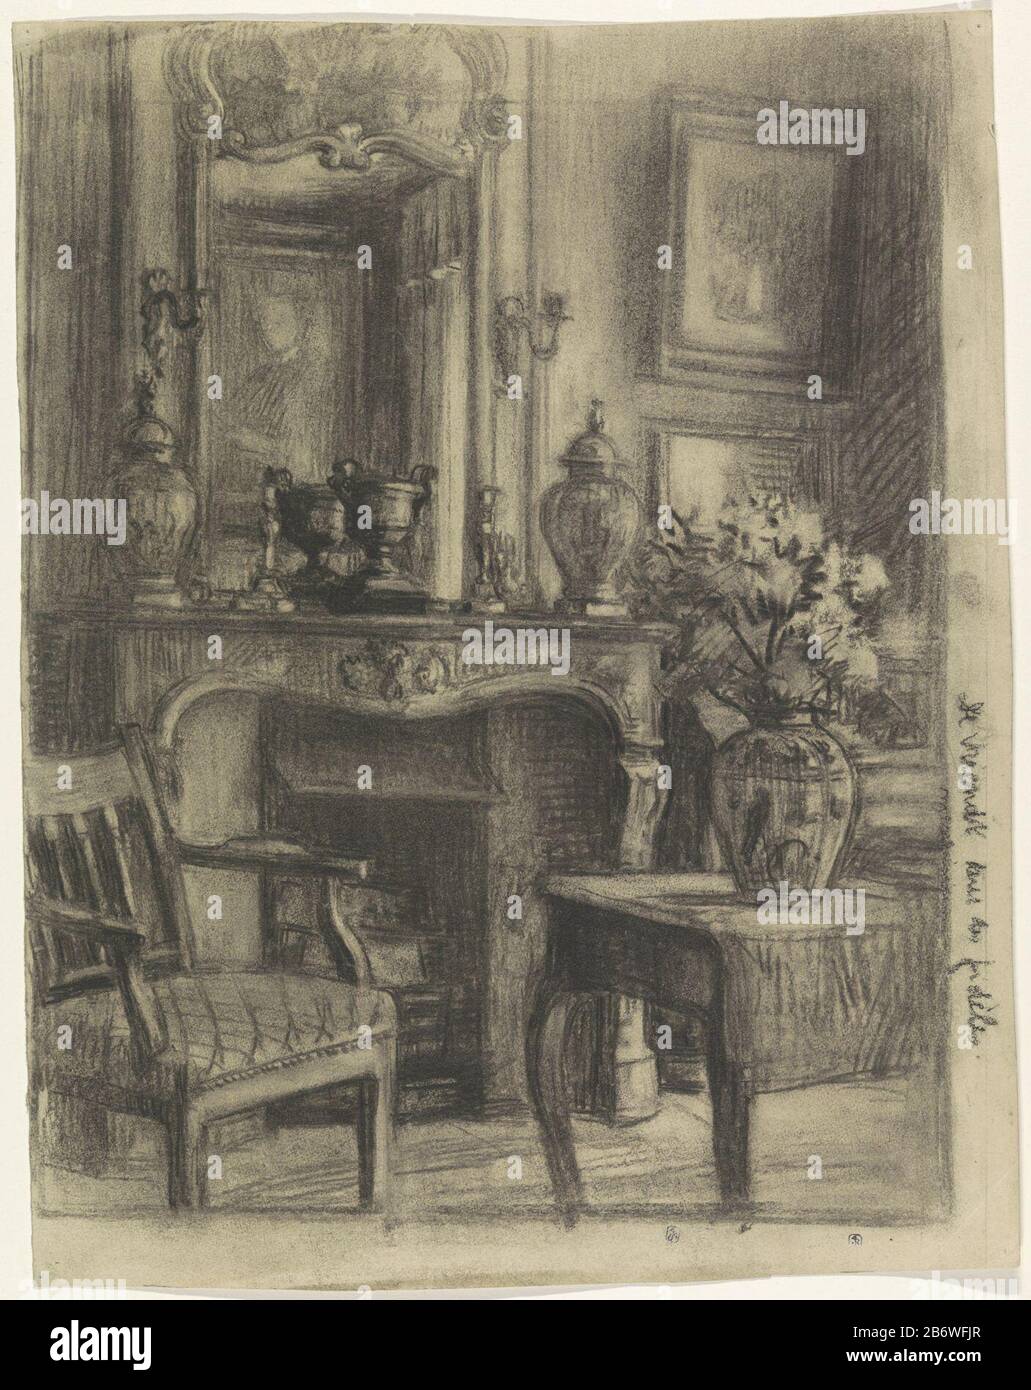 Interior of office of Mr. and Mrs. R. Janssens, Avenue Molière Property  Type: Drawing Object number: RP-T-1948-481 Inscriptions / Brands:  inscription: "Intérieur du bureau de M. et Mme R. Janssens, Avenue Molière'